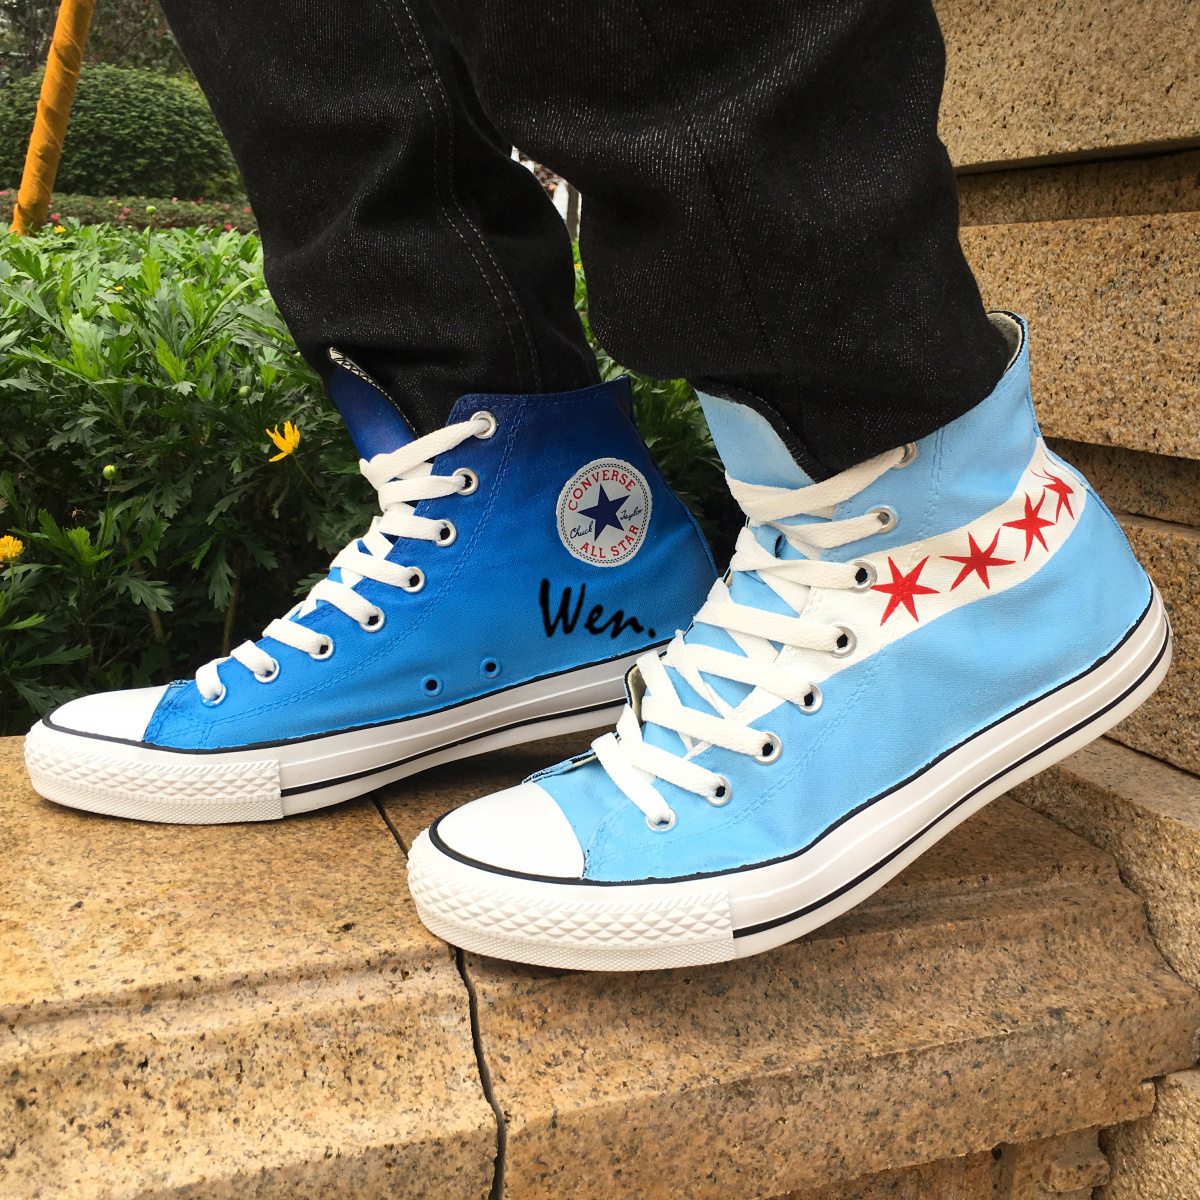 USA Chicago Flag Skyline Design Sneakers Converse All Star Hand Painted Shoes